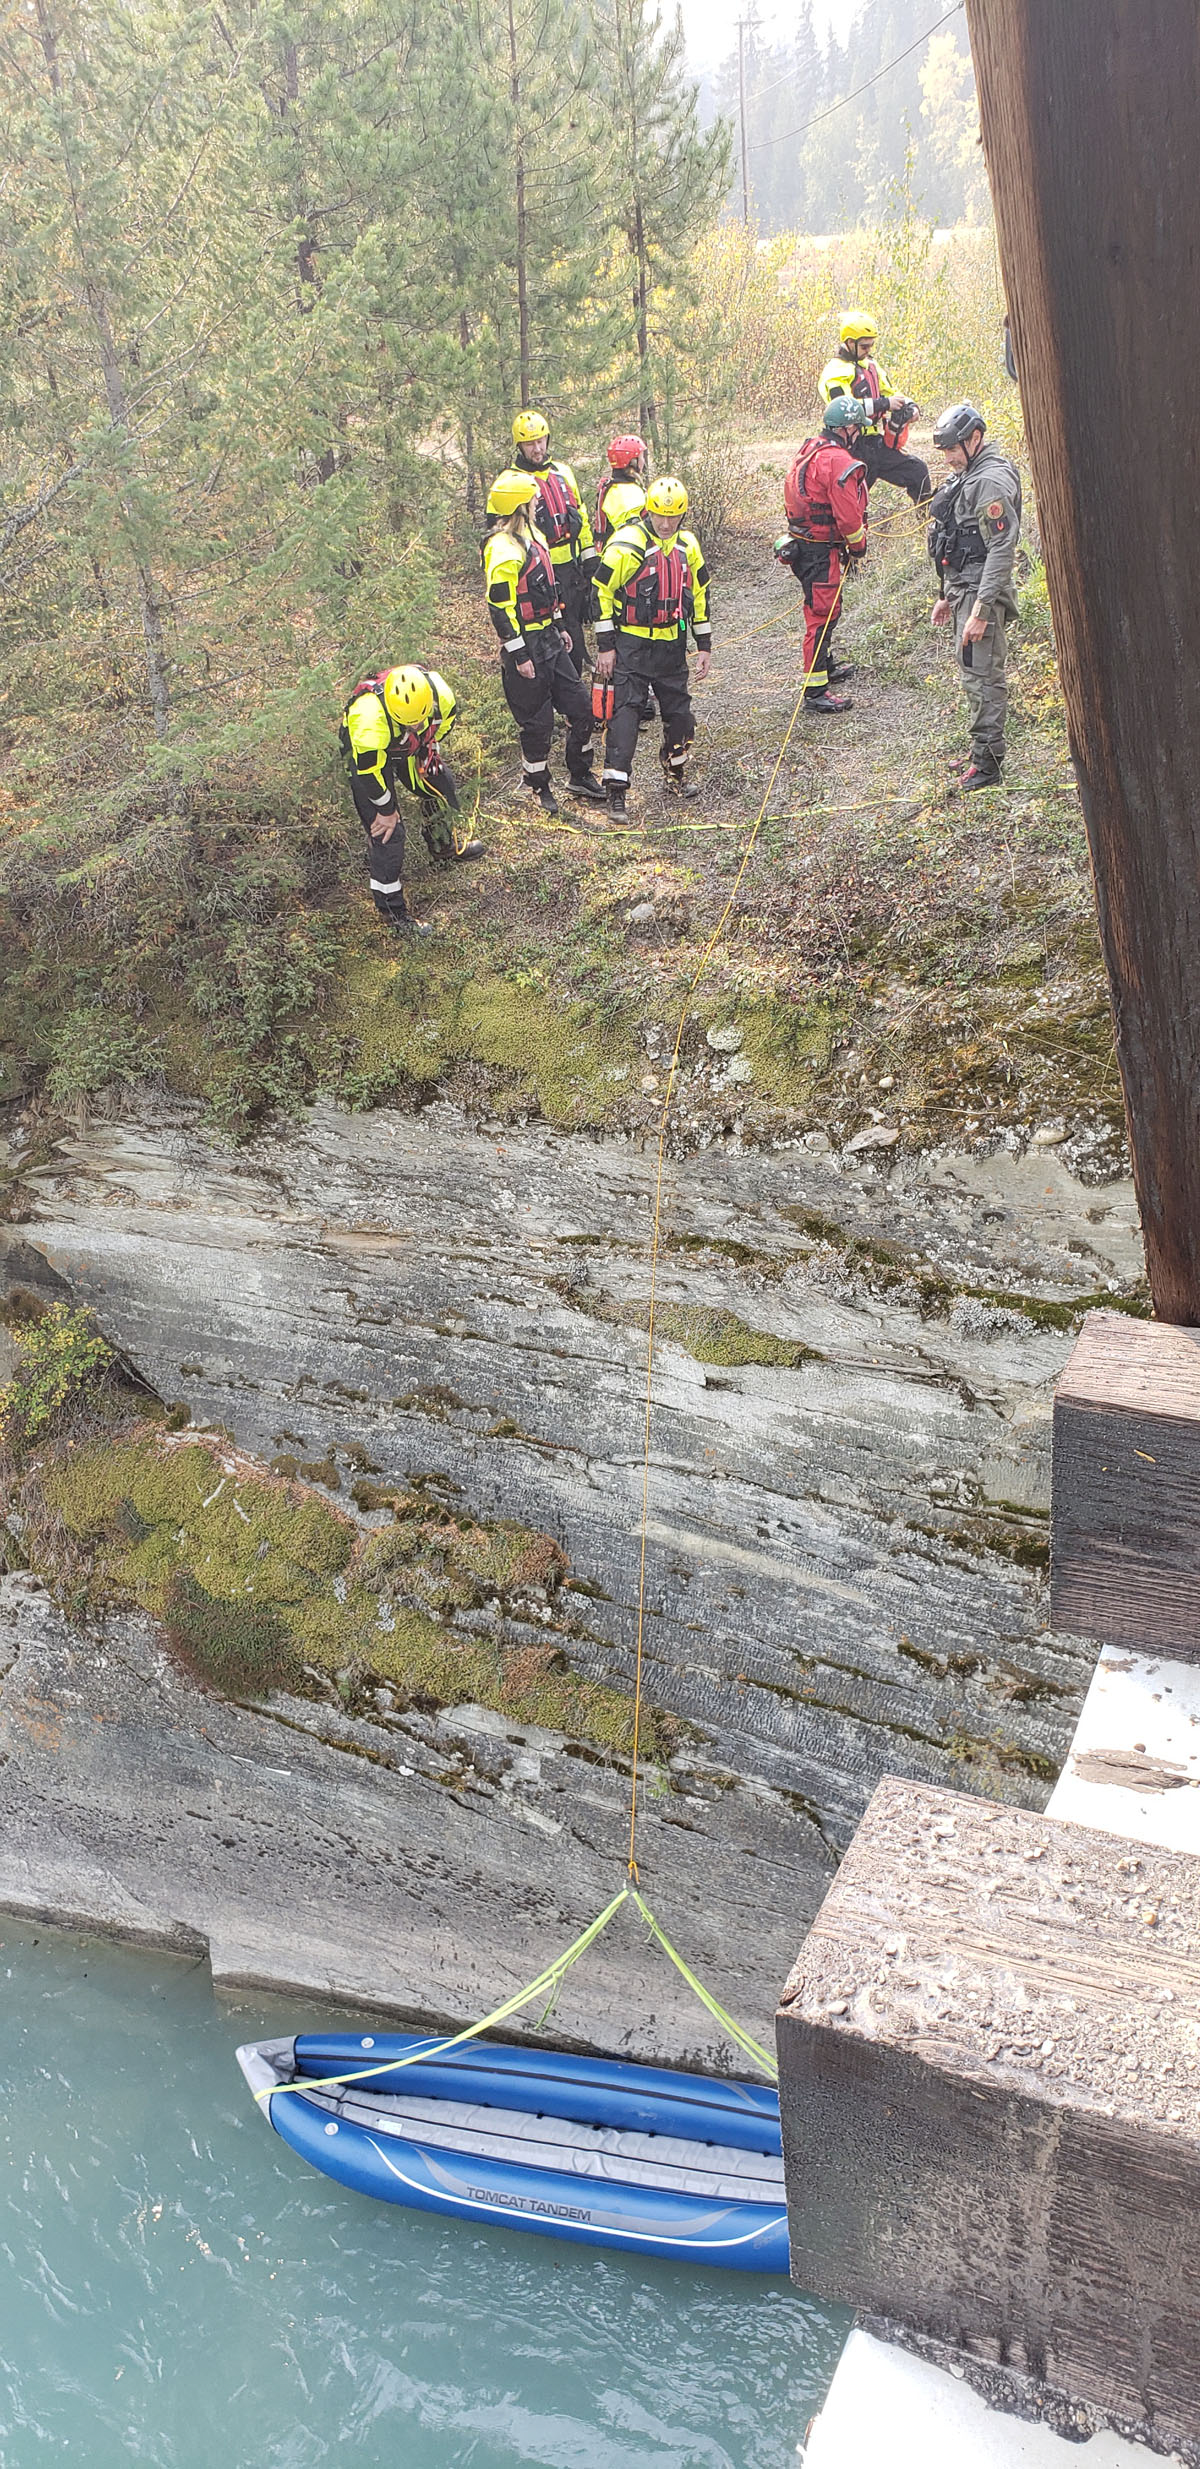 Swift Water Rescue training ups the stakes - The Rocky Mountain Goat